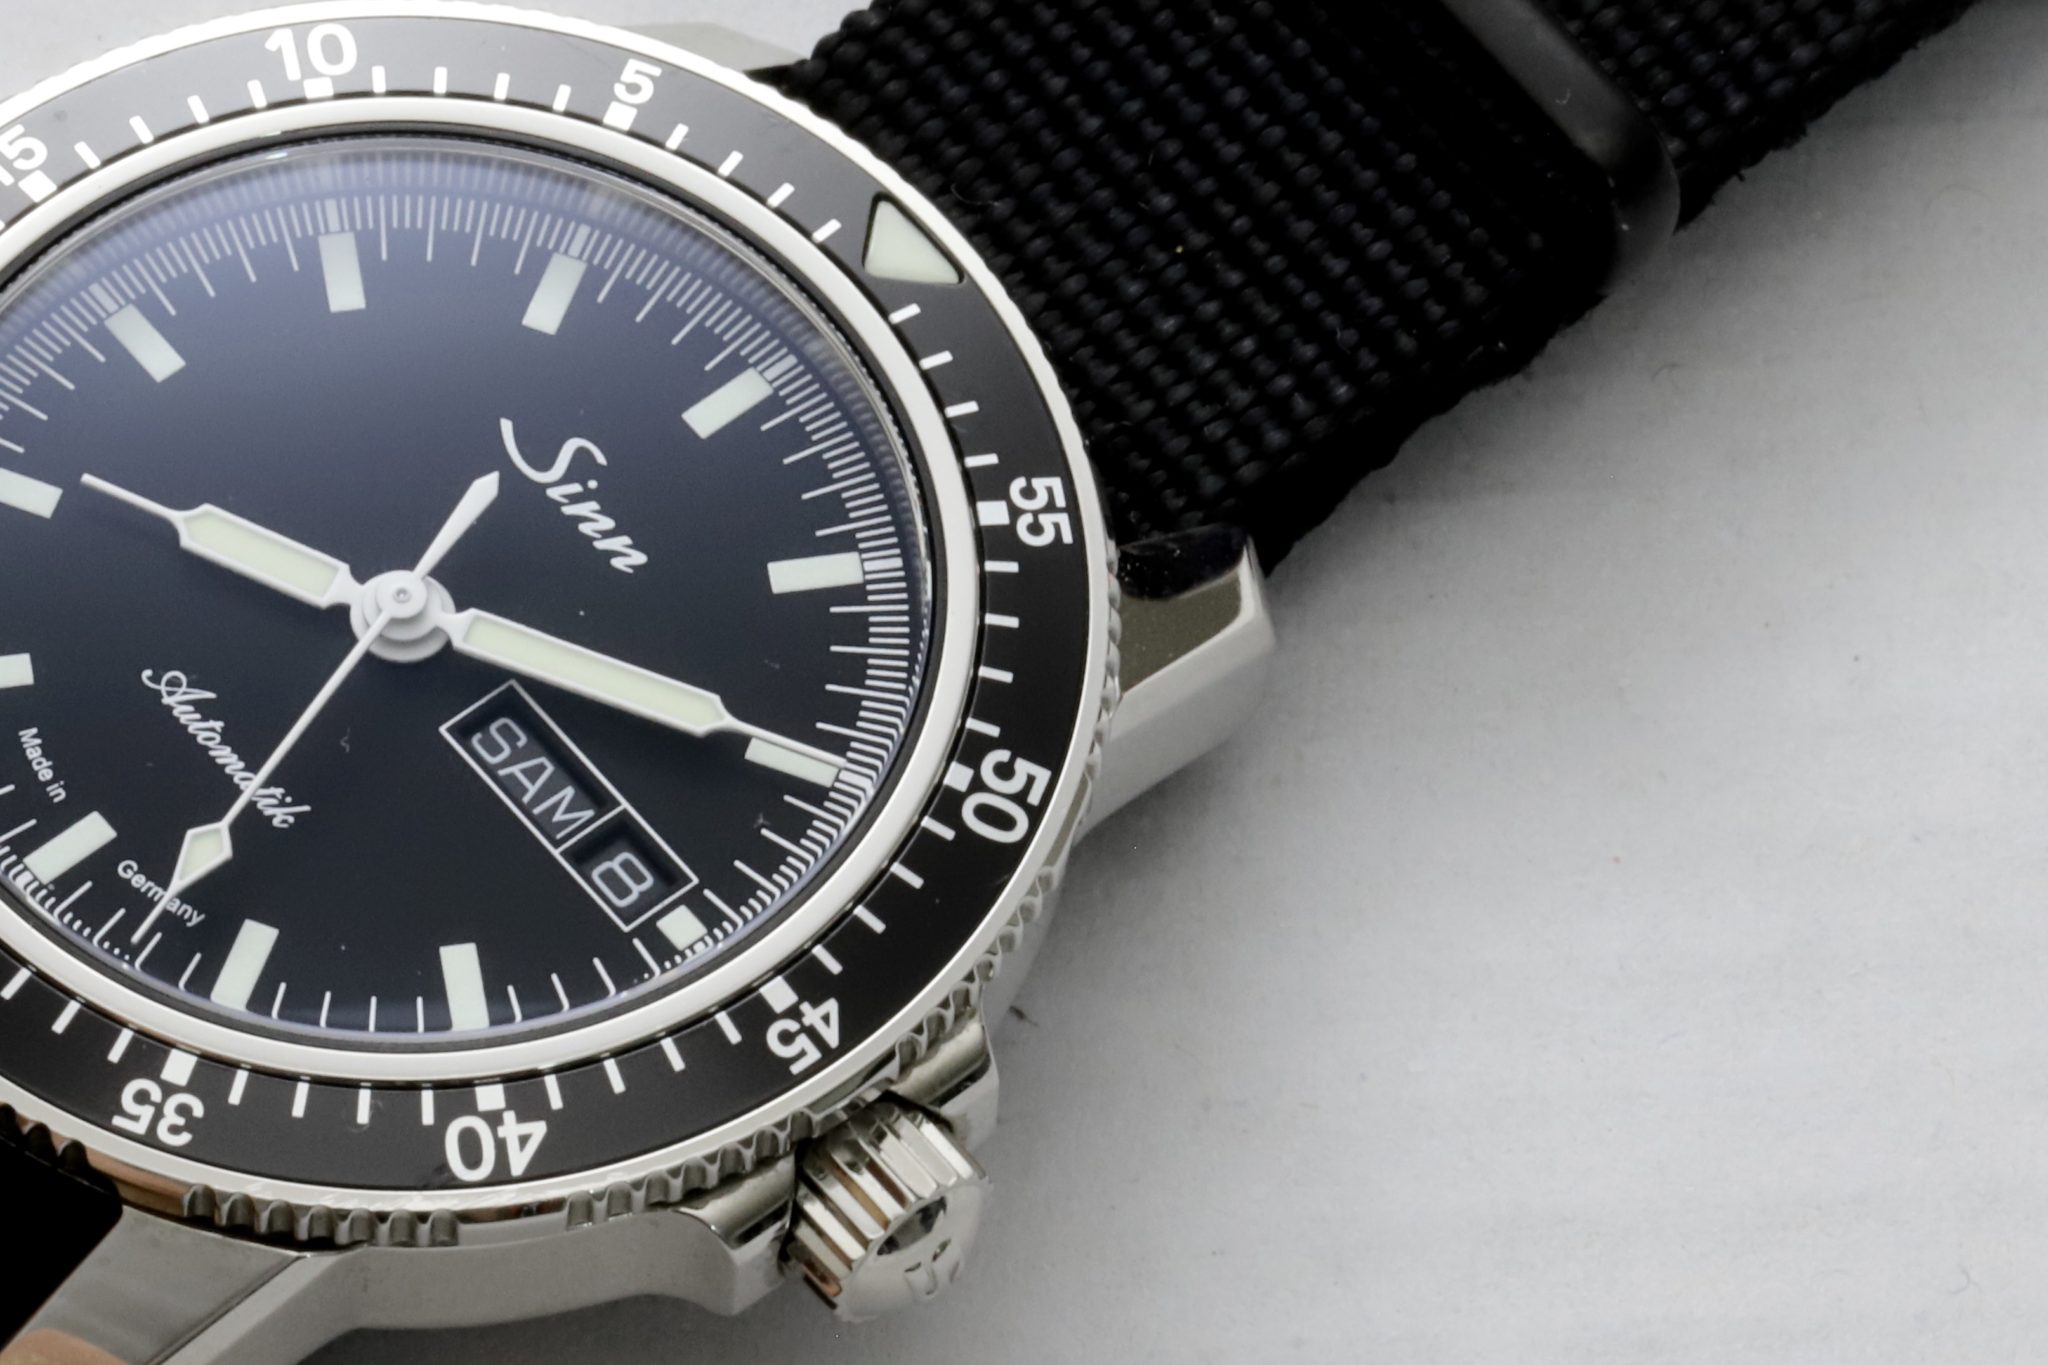 Owner Review: Sinn 104 – one of the best value tool watches